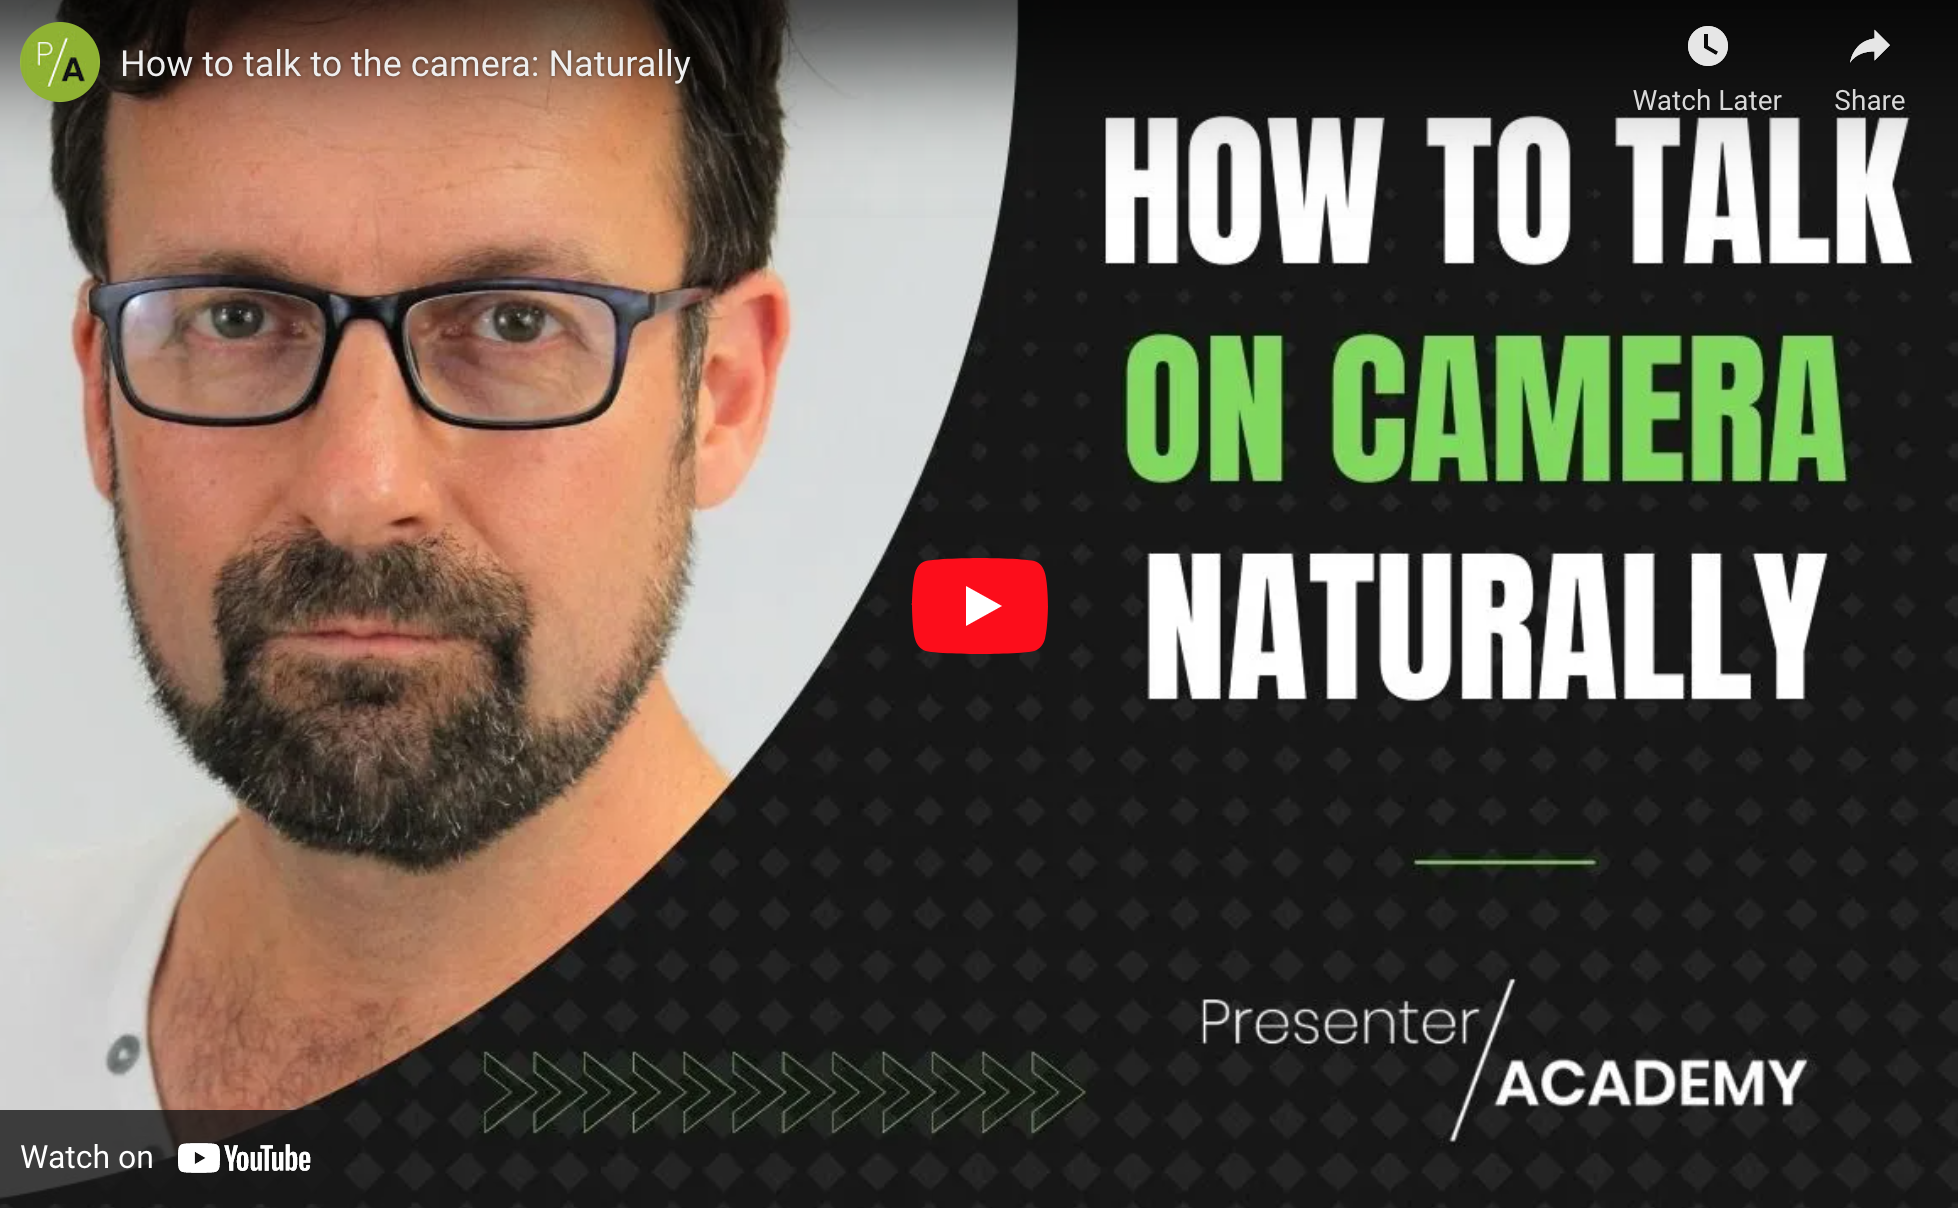 How to talk to the camera: Naturally